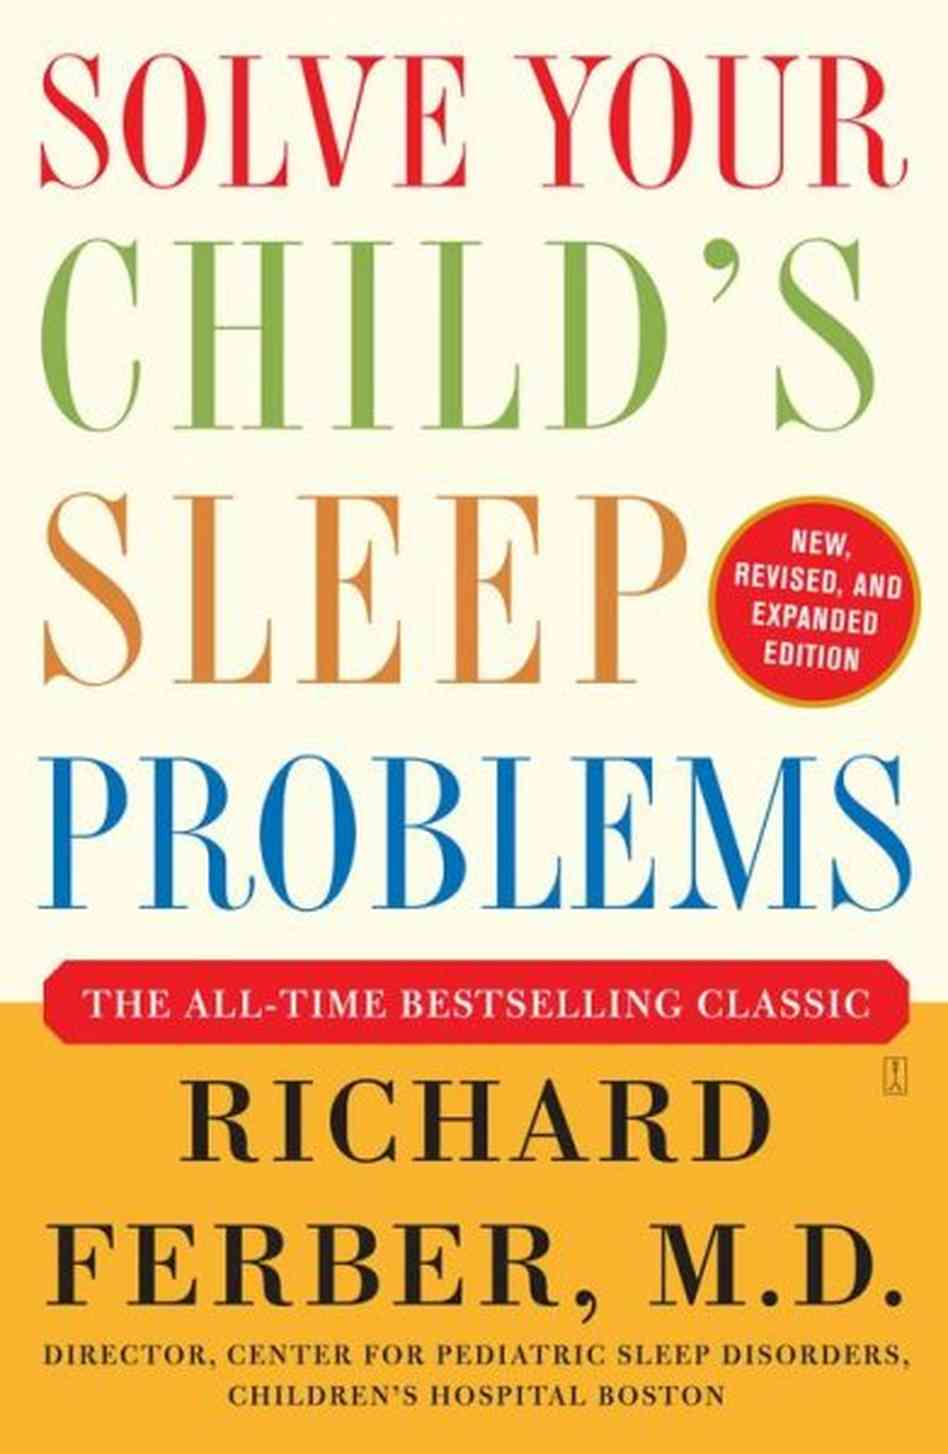 Solve your childs sleep problems: new, revised, and 